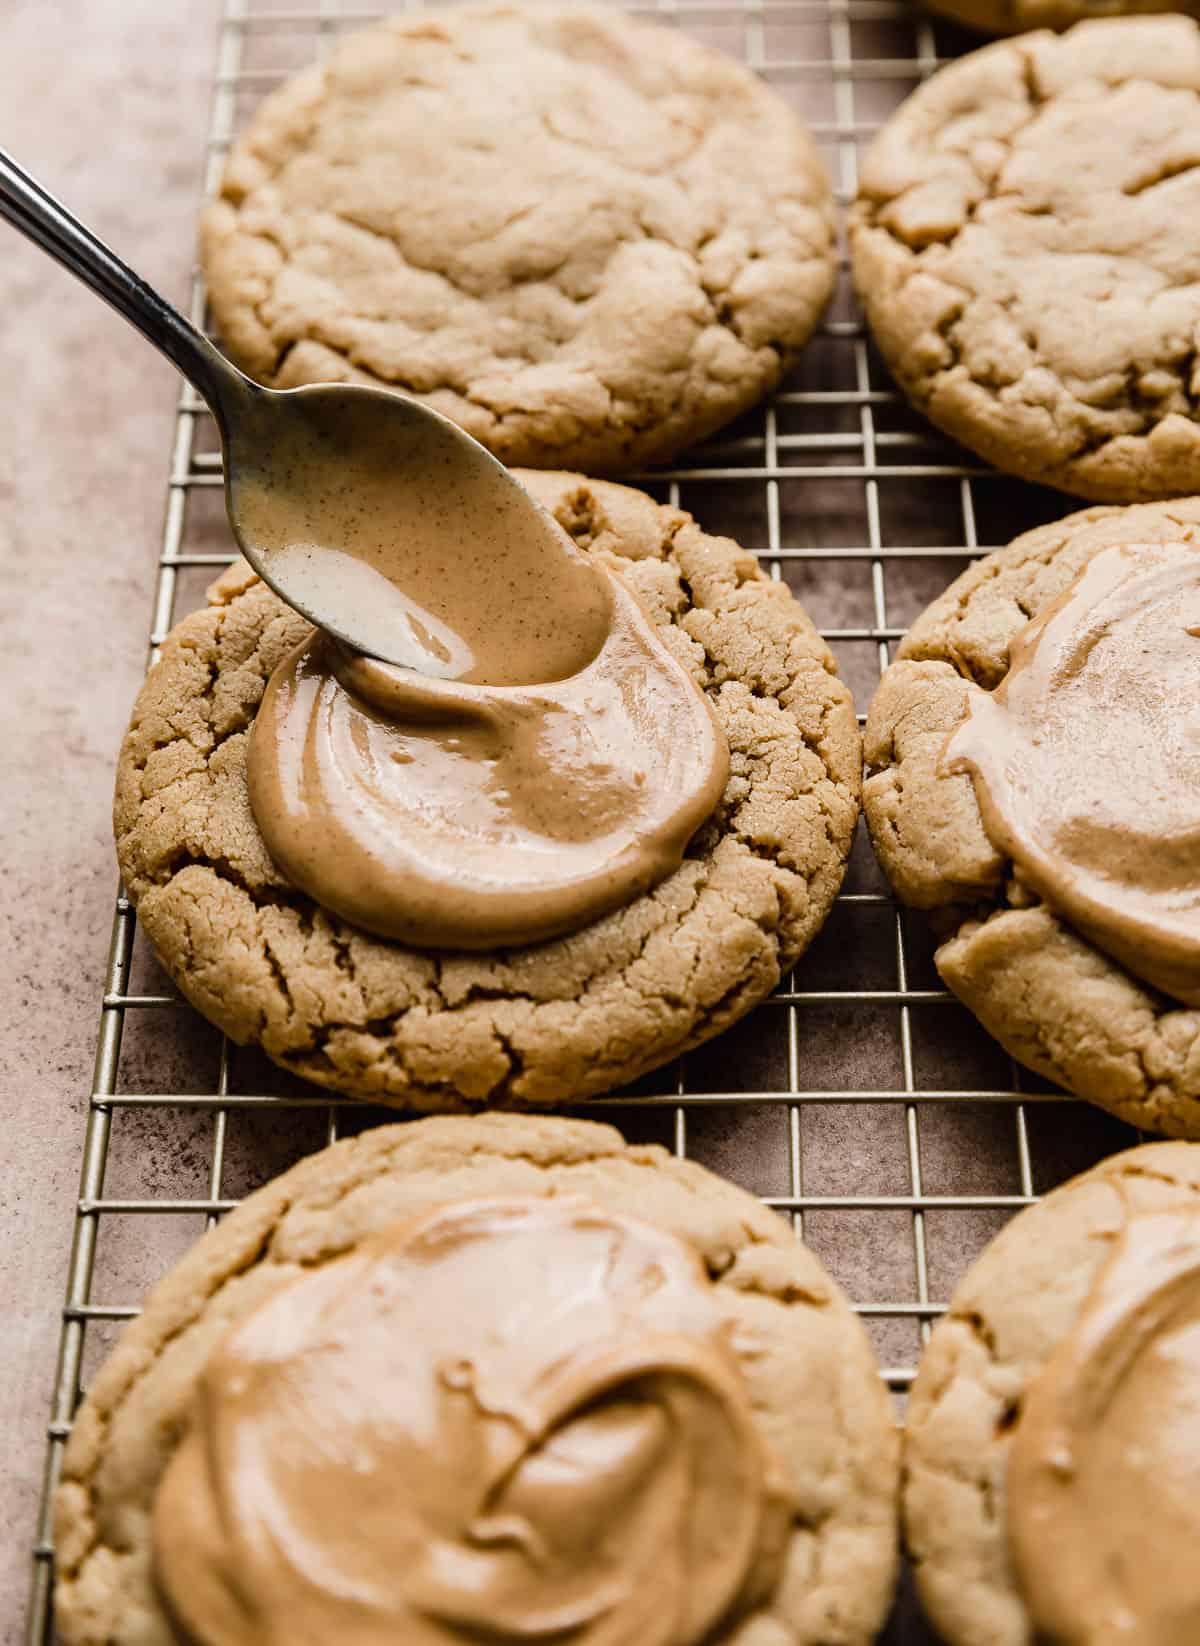 A spoon spreading melted peanut butter on top of a peanut butter cookie.